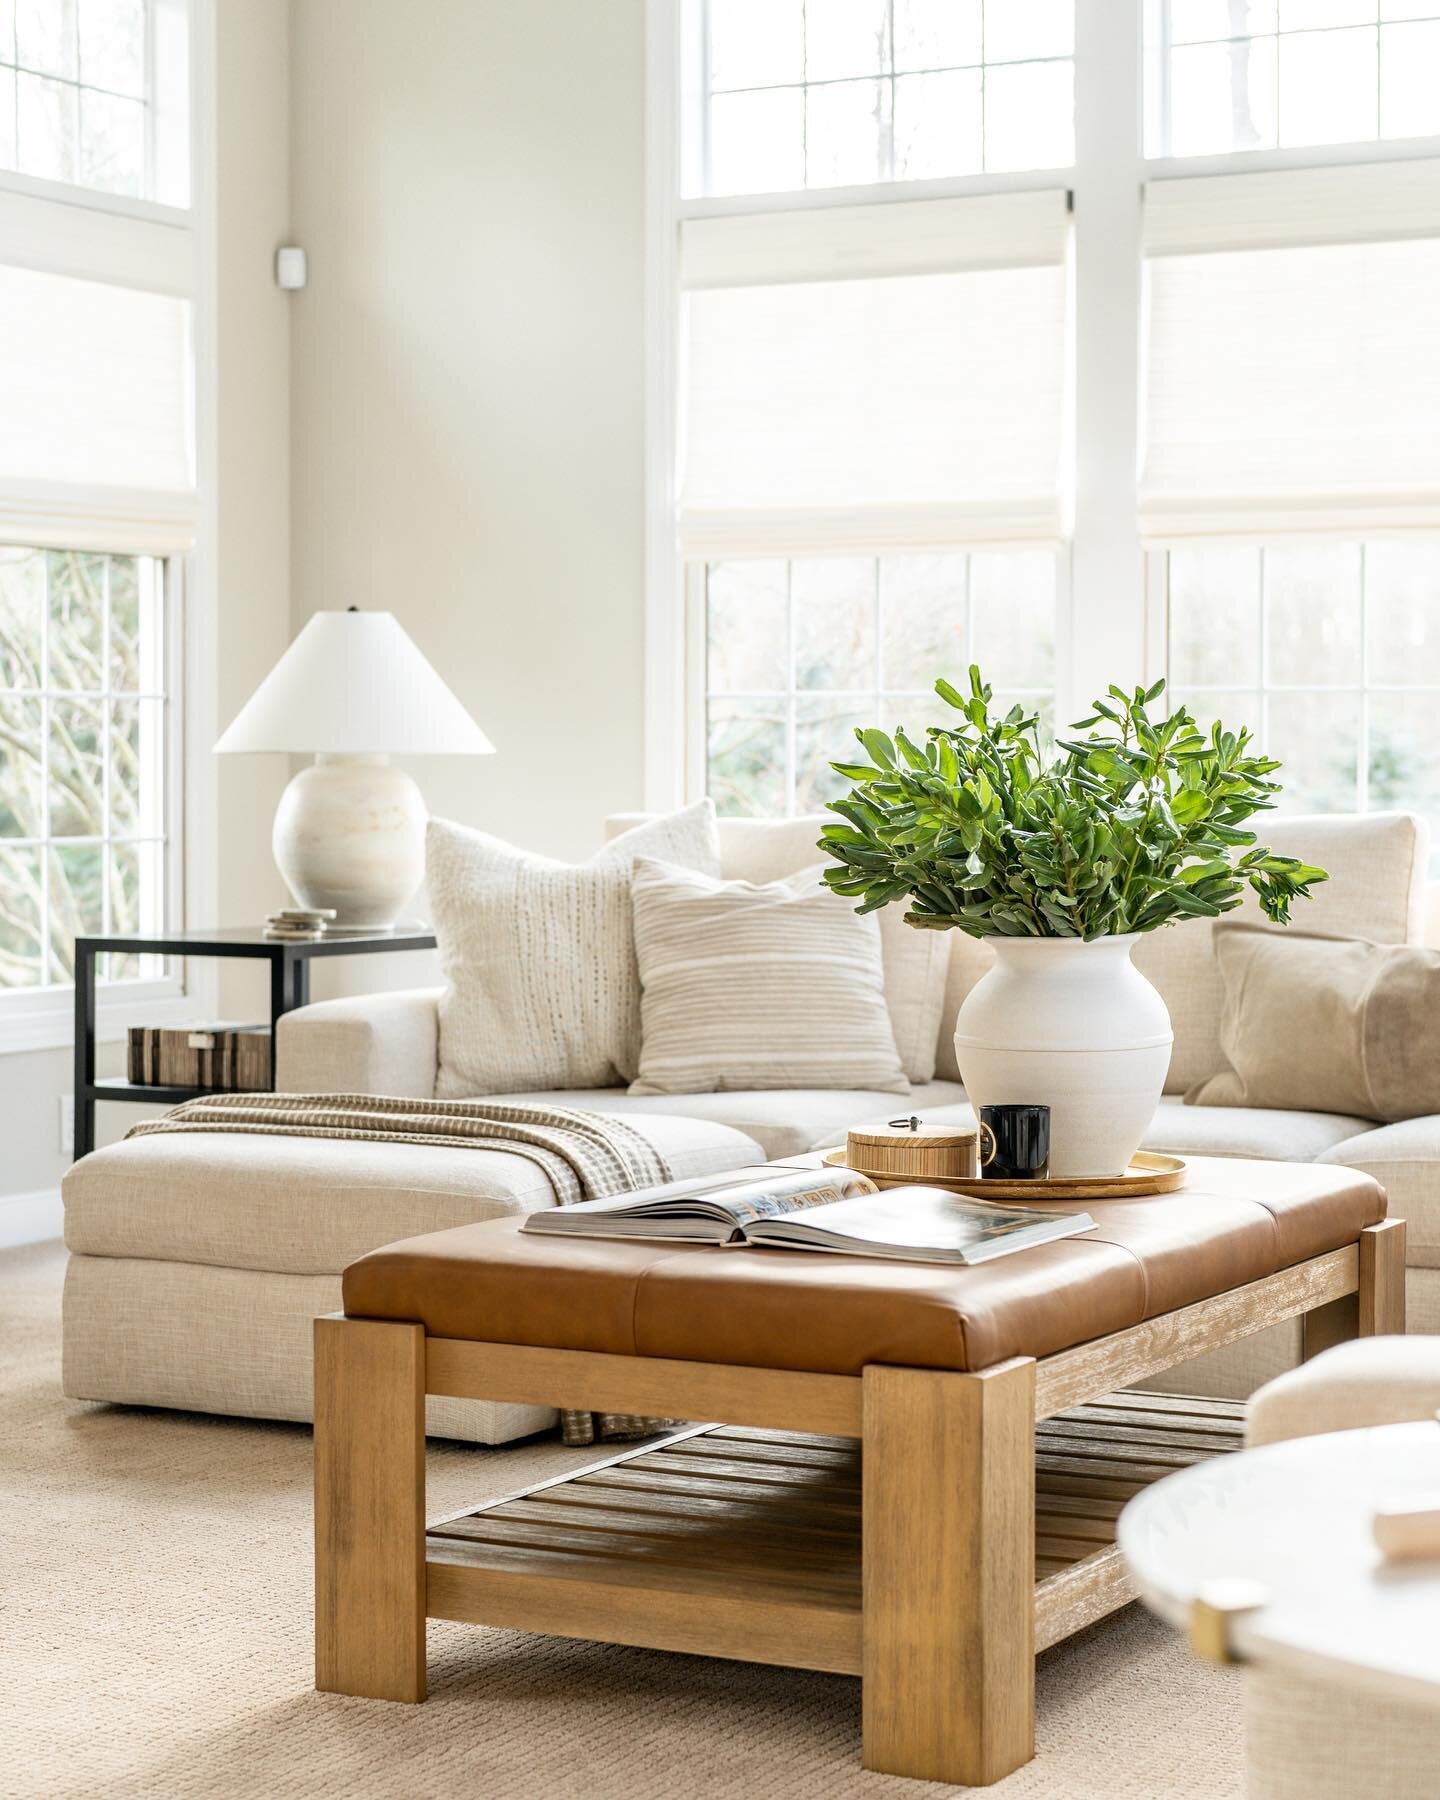 So much sun in this cozy family room&hellip; still one of my favorite spots from this project. #shawncroneinteriors